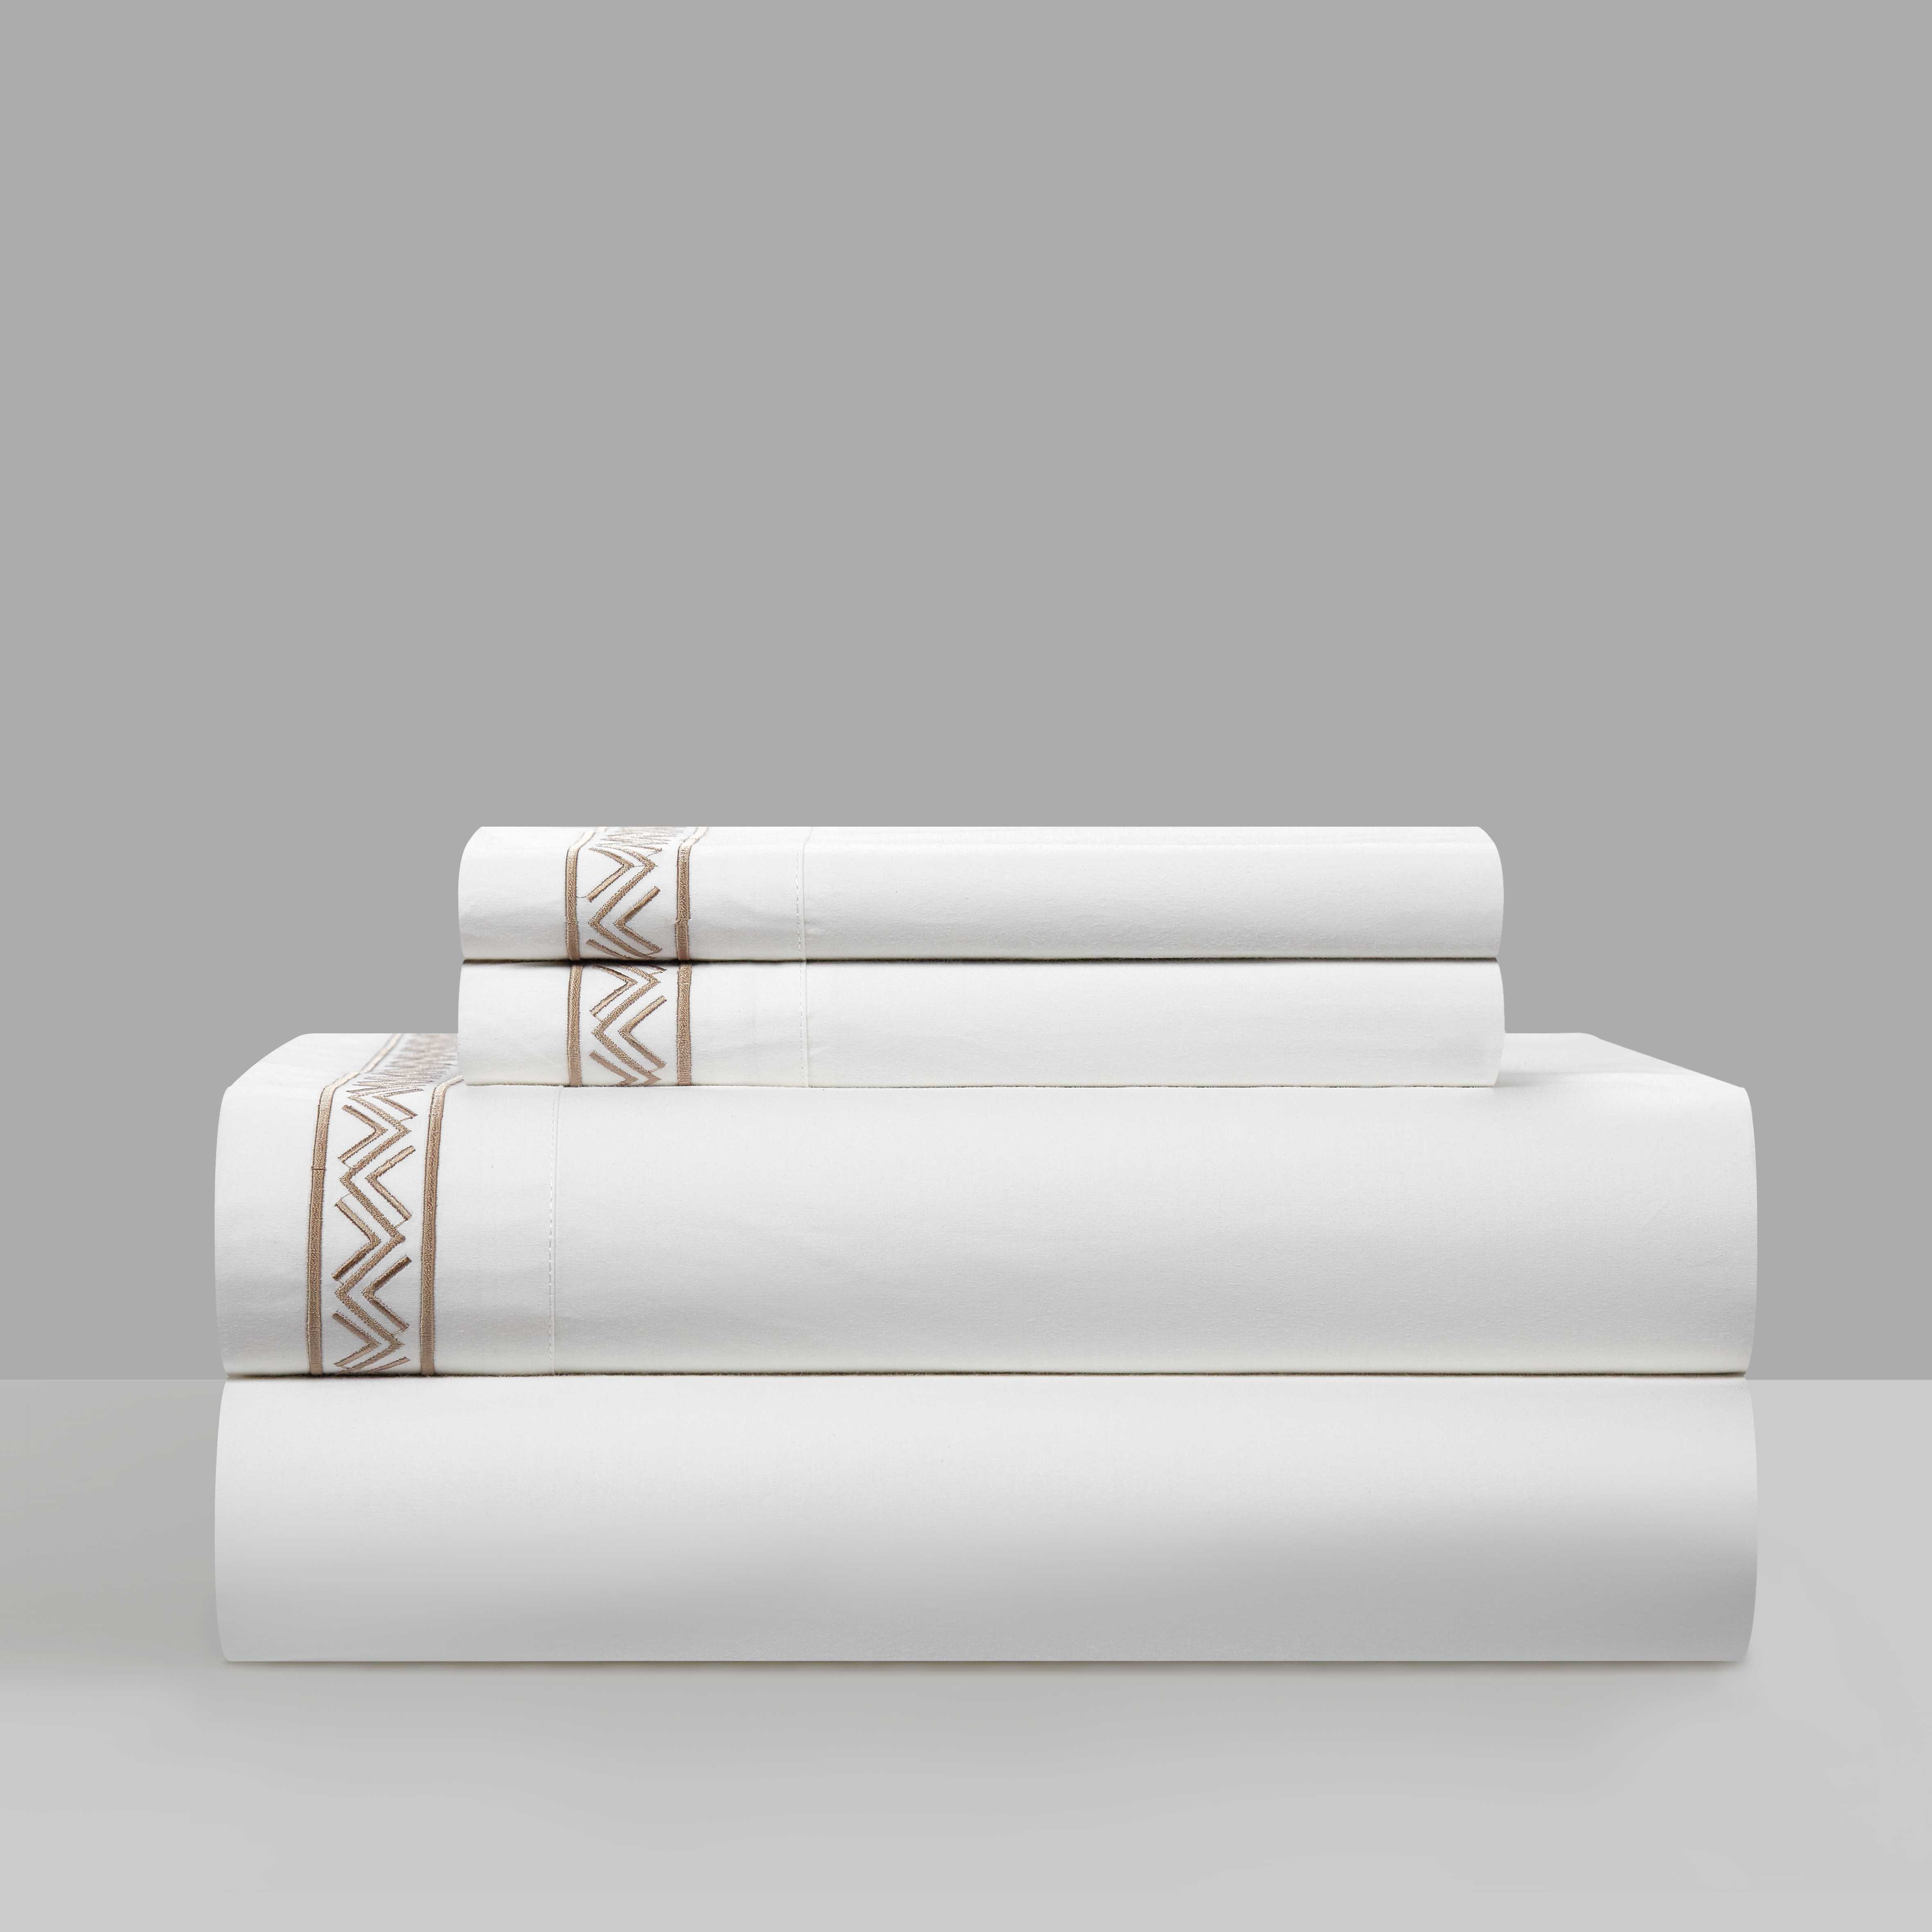 4 Piece Orden Organic Cotton Sheet Set Solid White With Dual Stripe Embroidery - Beige, King